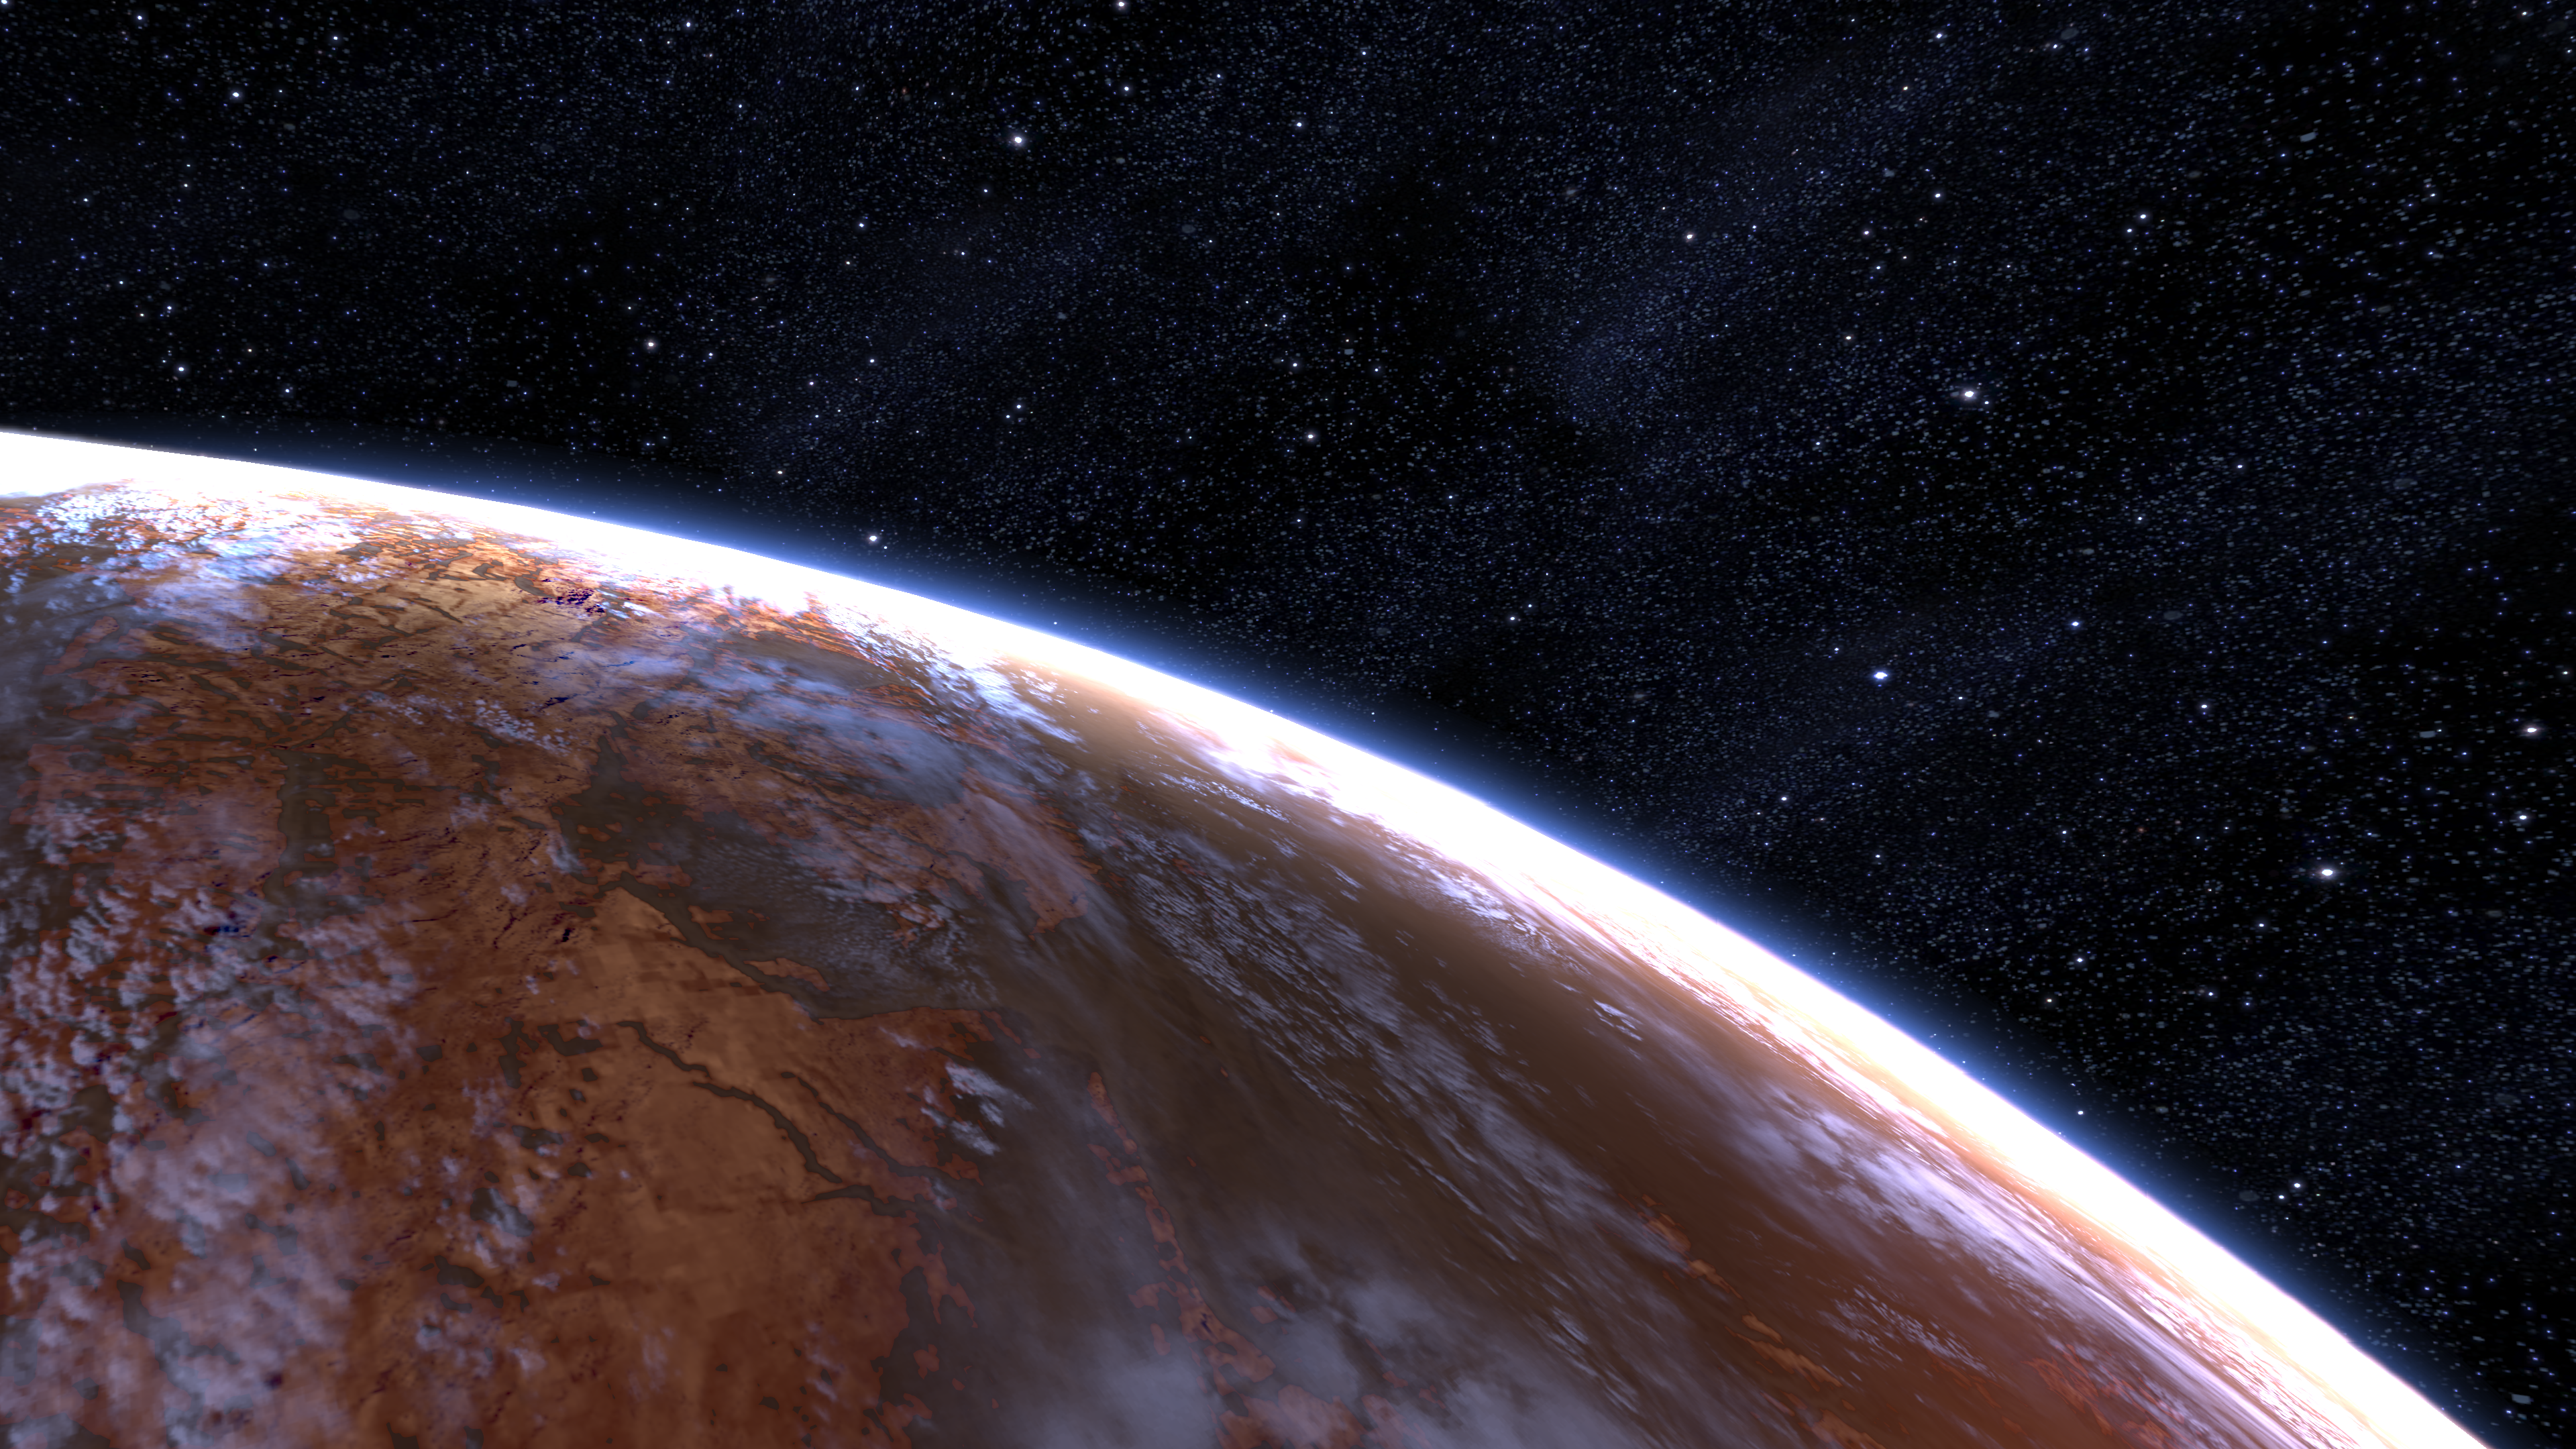 http://vignette3.wikia.nocookie.net/masseffect/images/1/1f/Therum_(orbit).png/revision/latest?cb=20140918142456